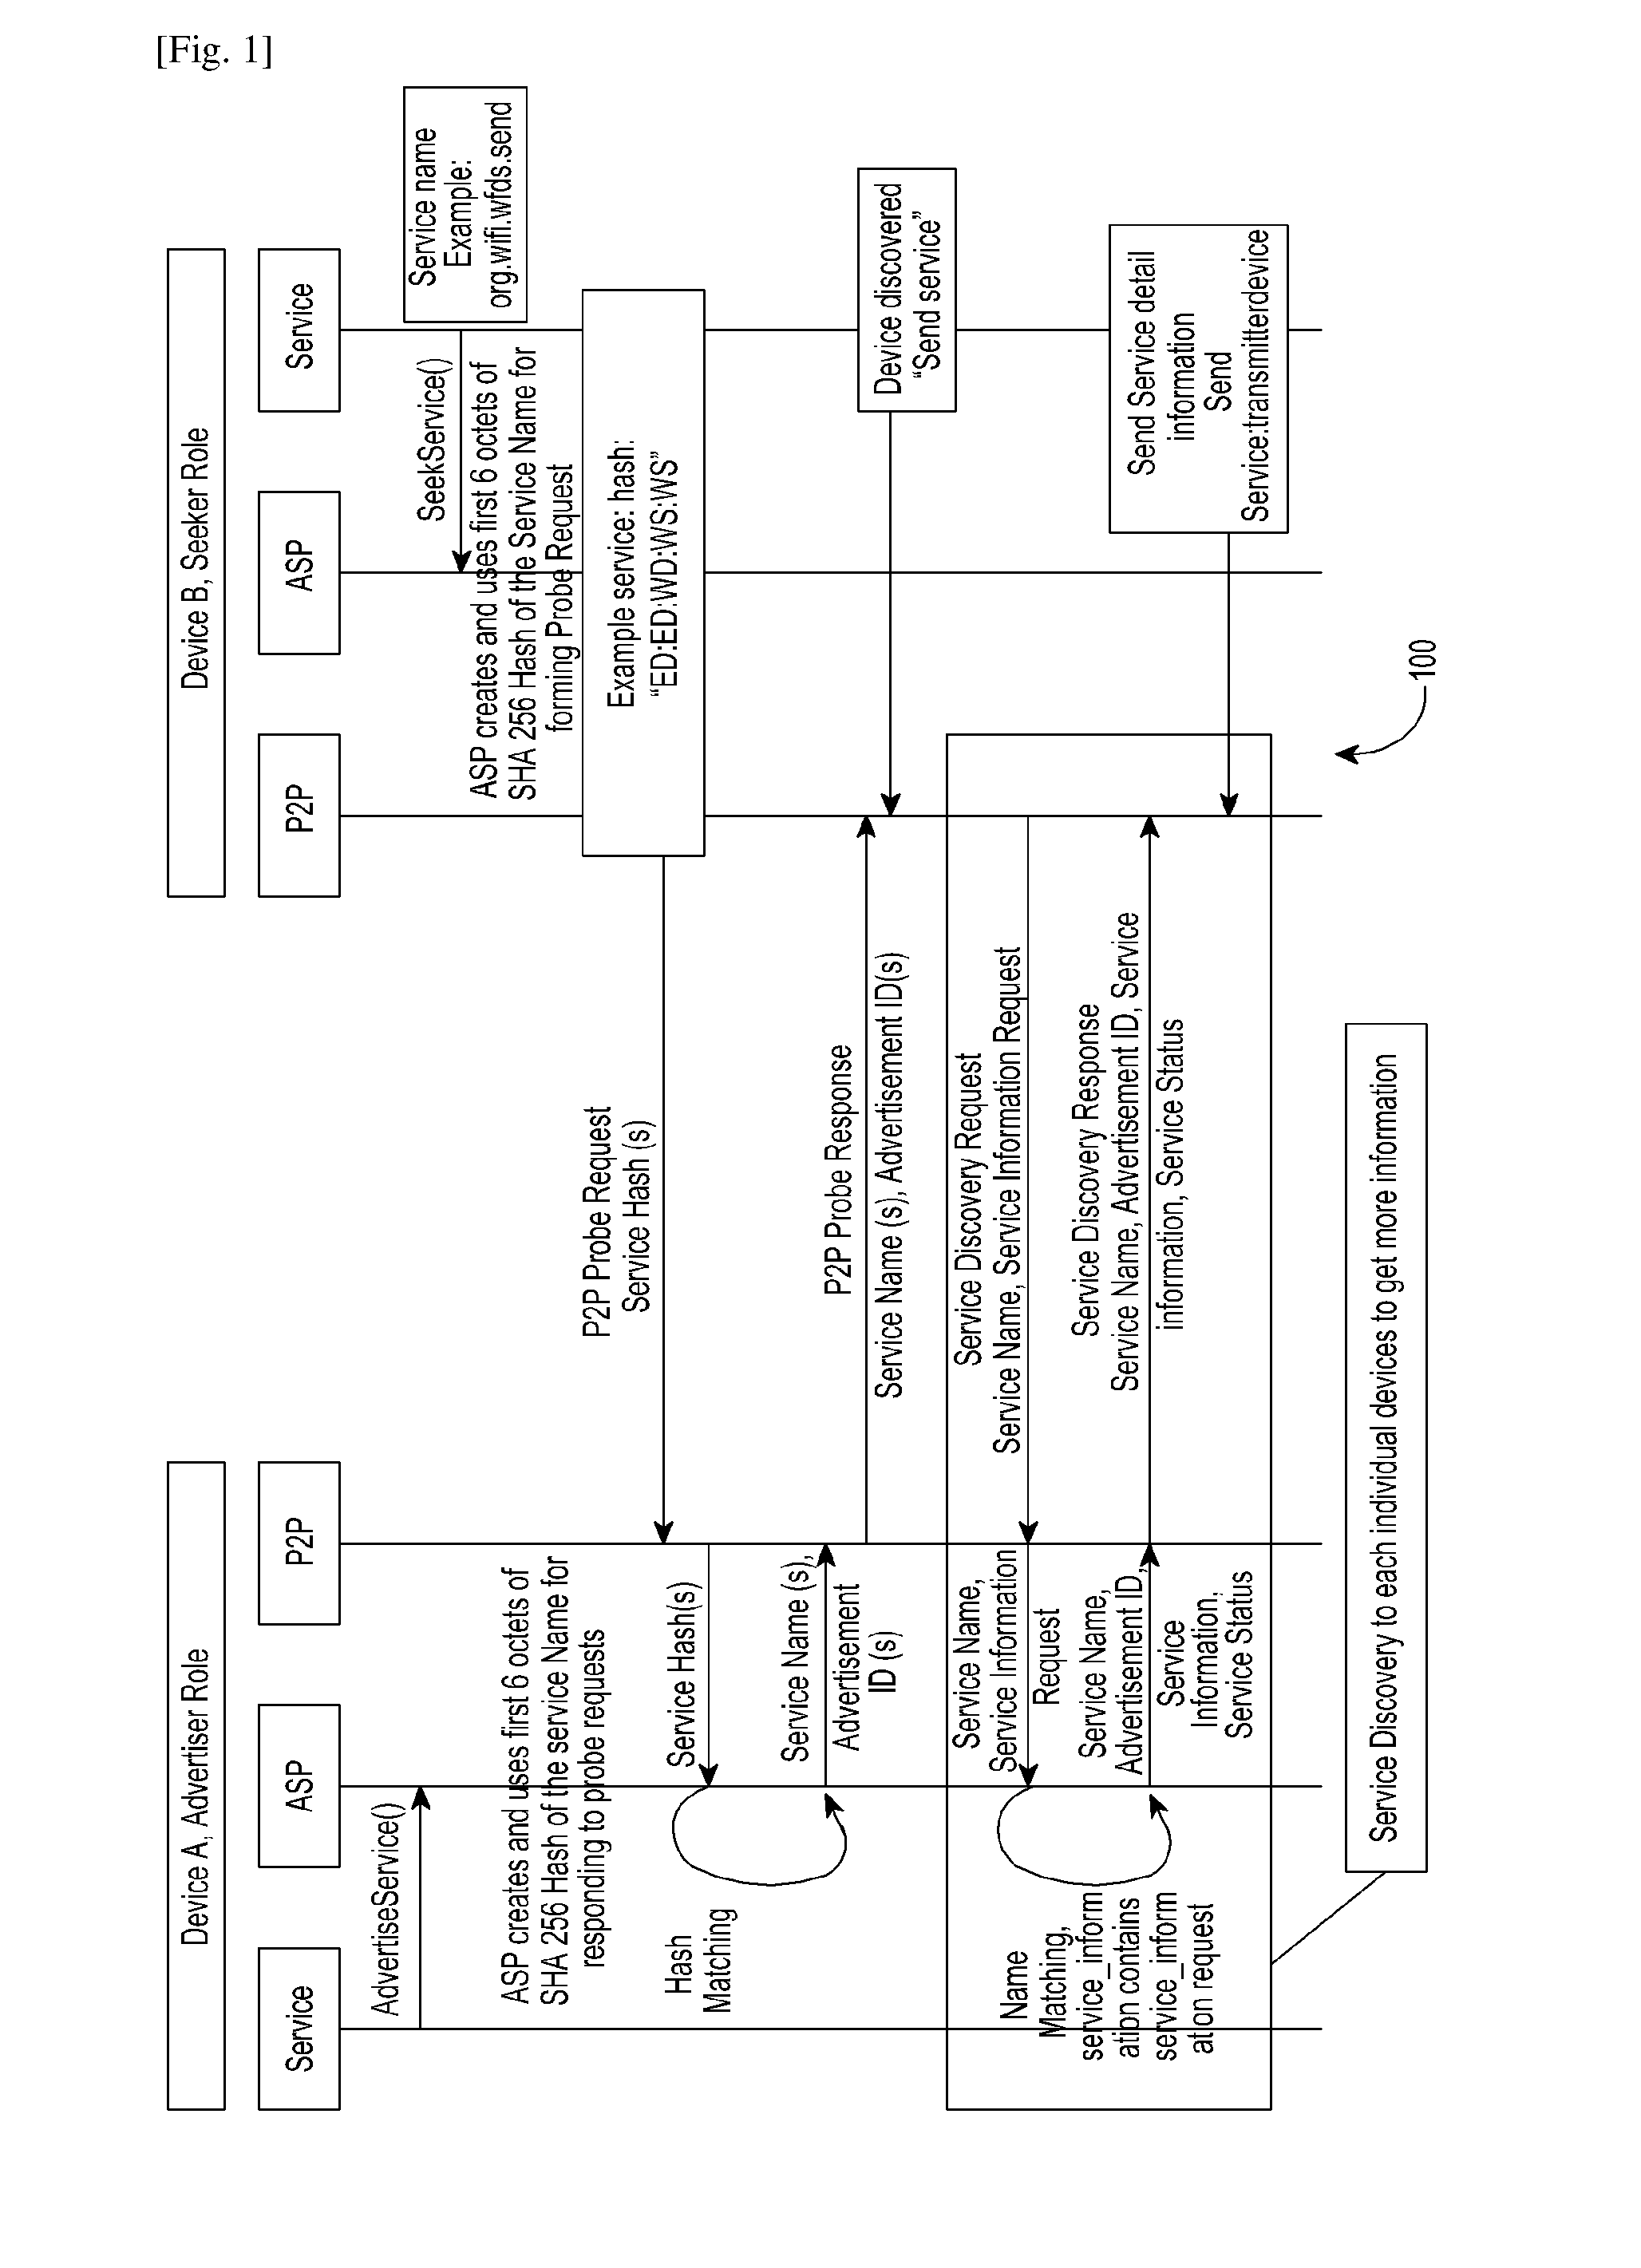 Method and system for dual role handling in a wireless environment